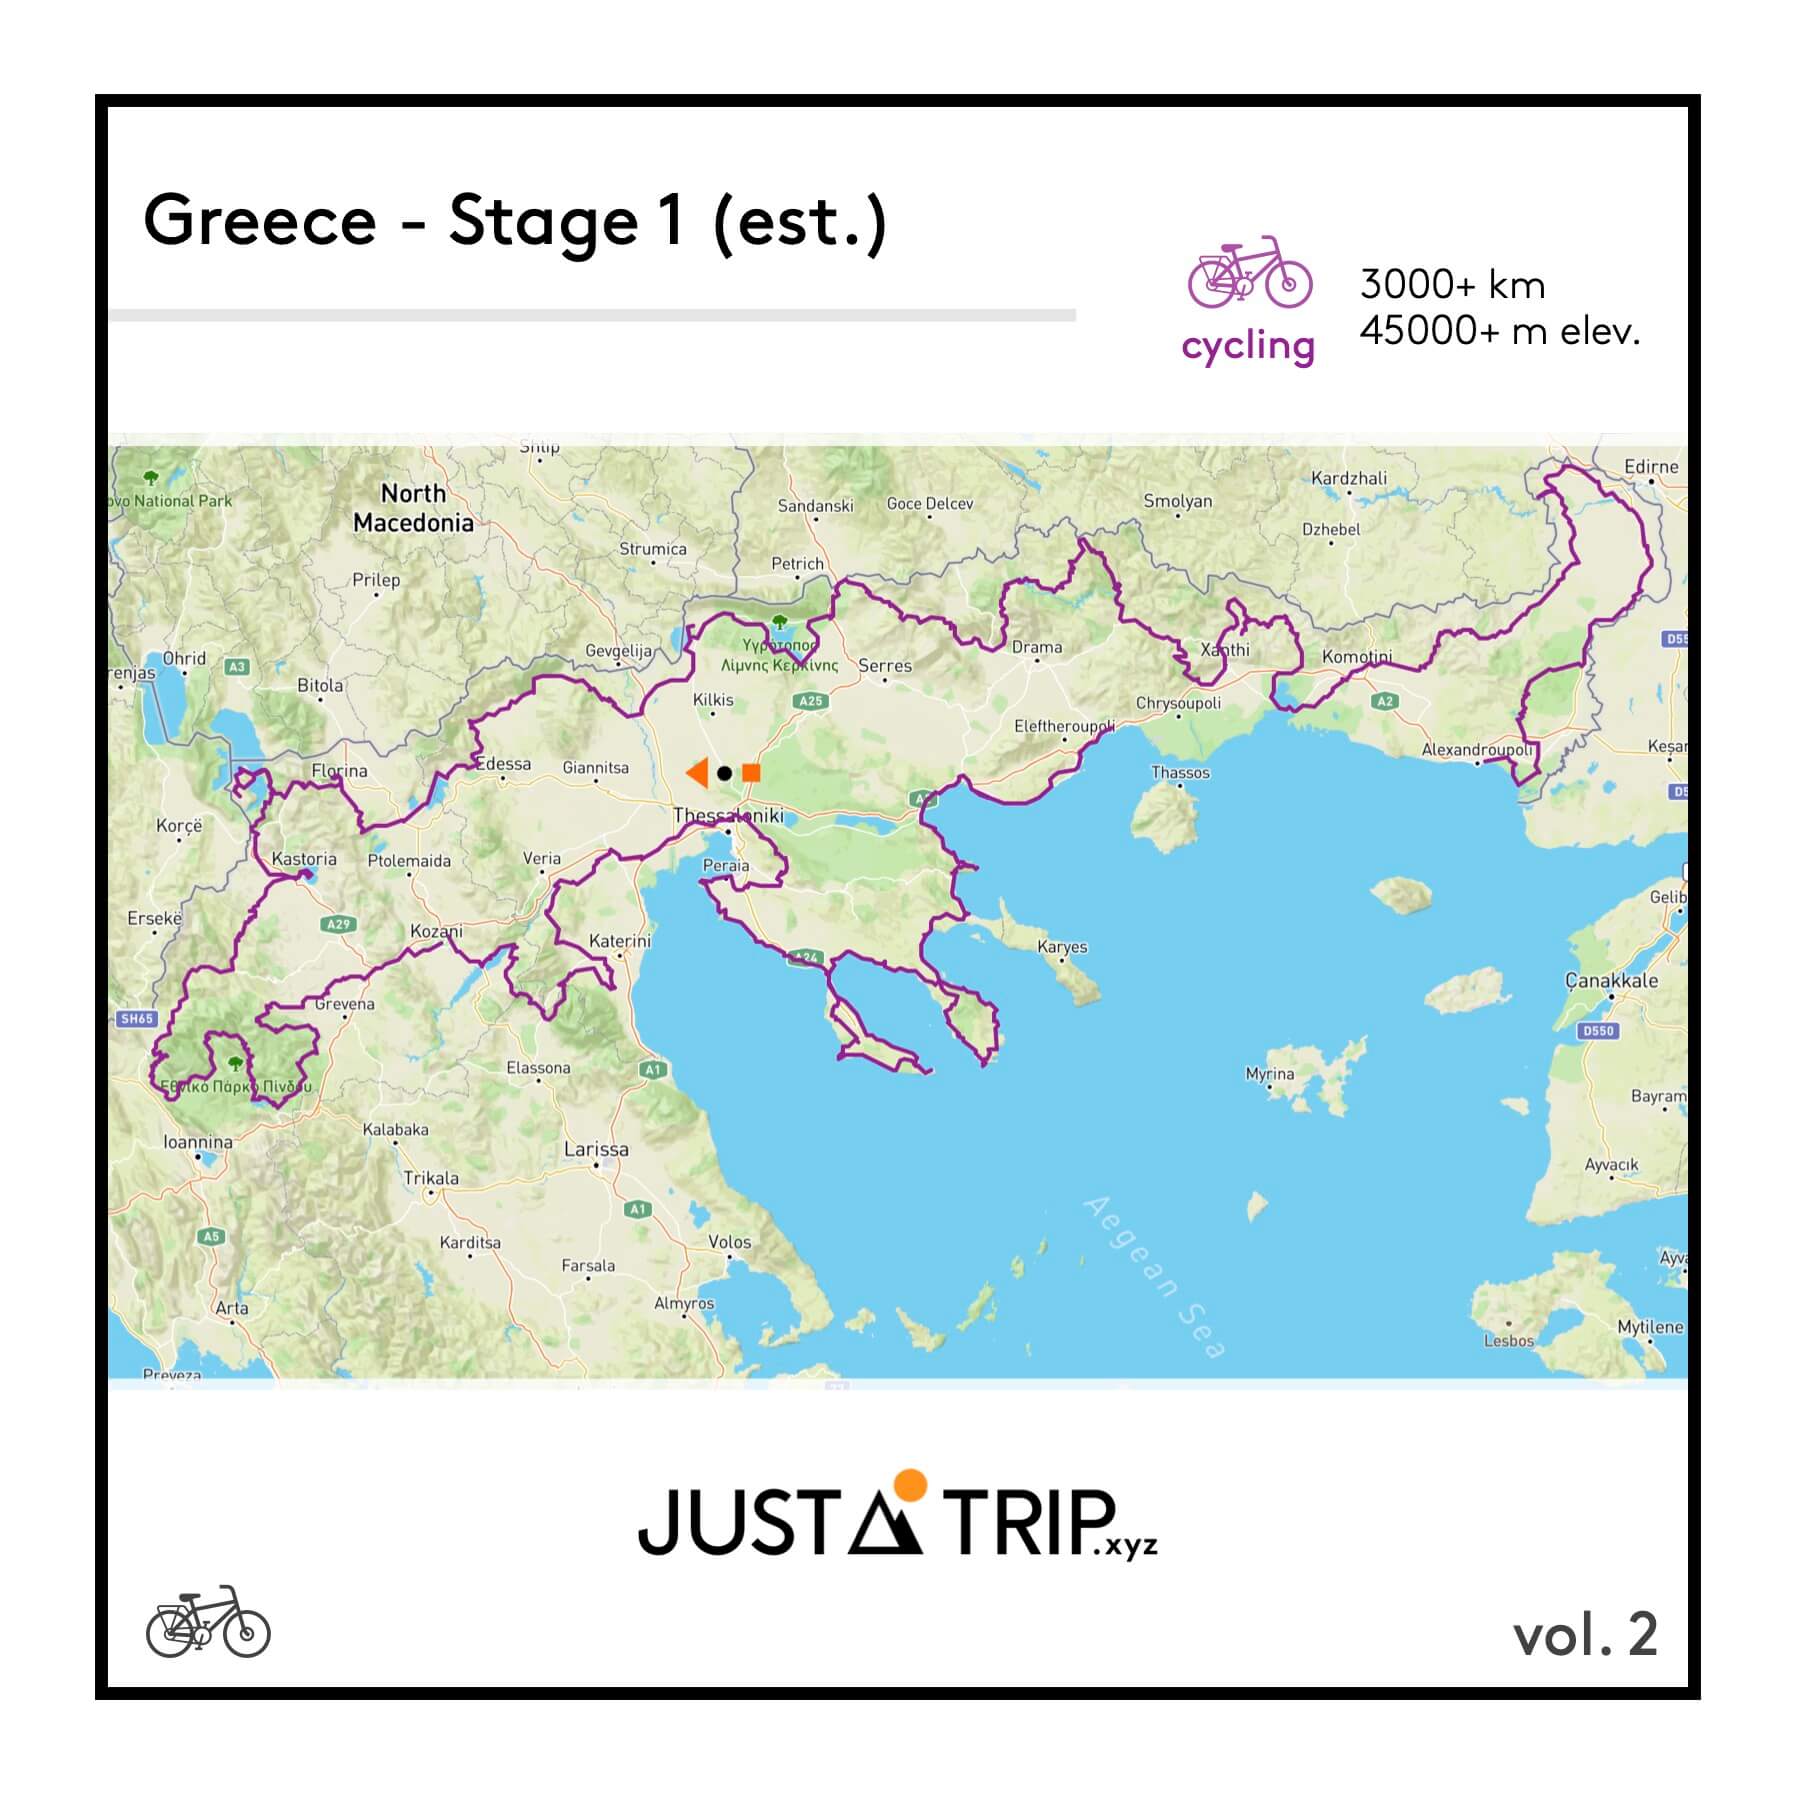 Just-a-Trip around the world (vol. 2) - Greece, Stage 1